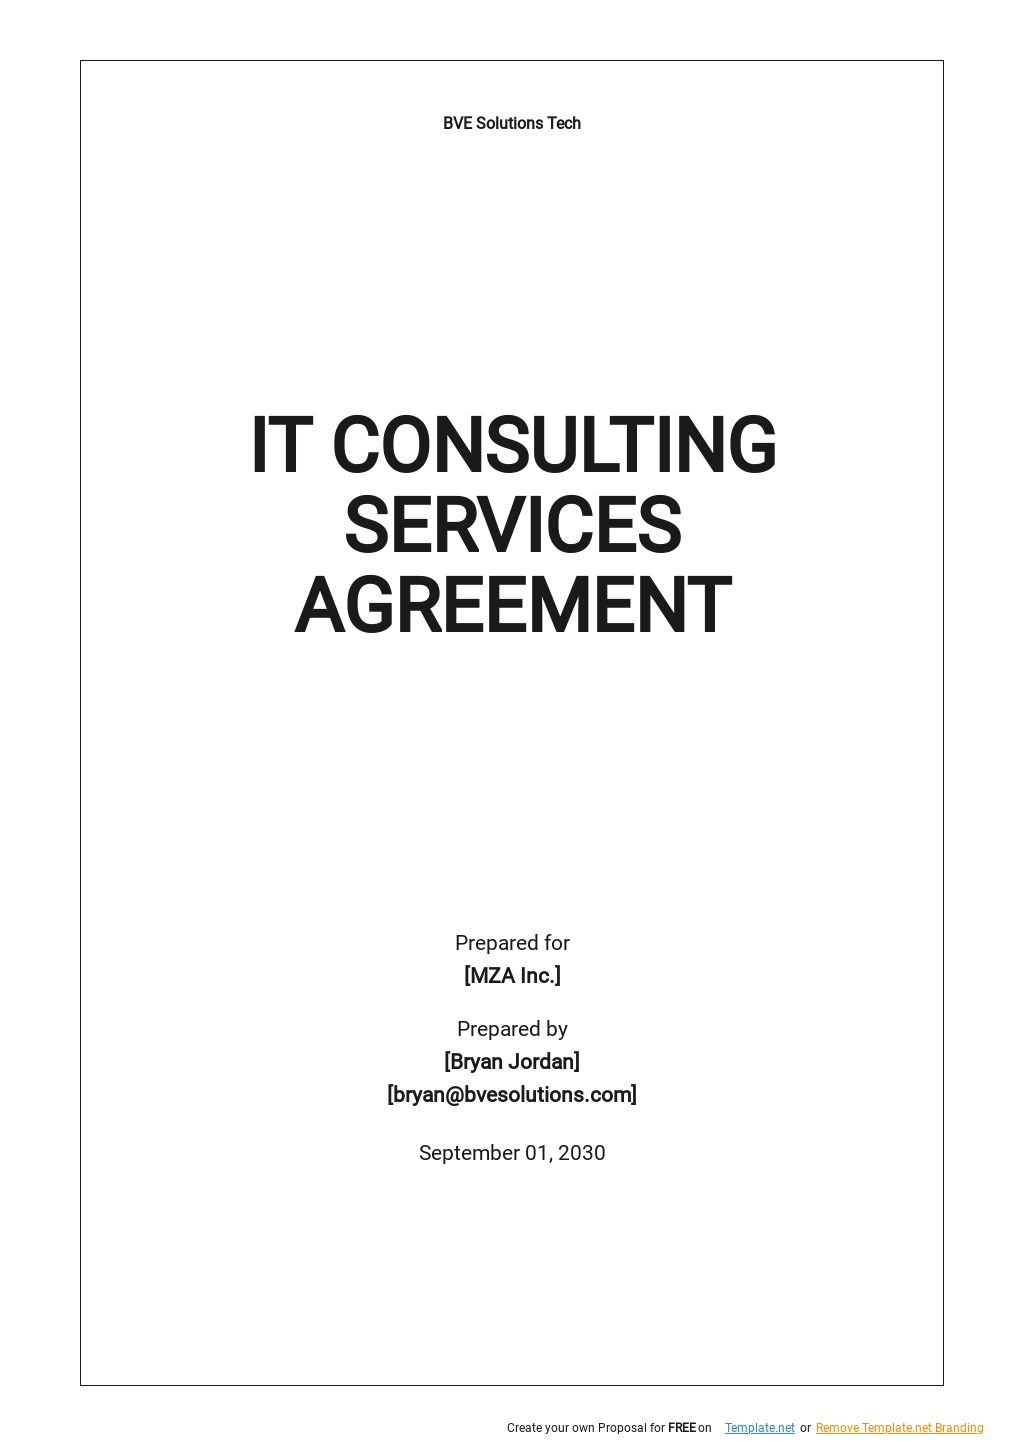 IT Consulting Services Agreement Template.jpe